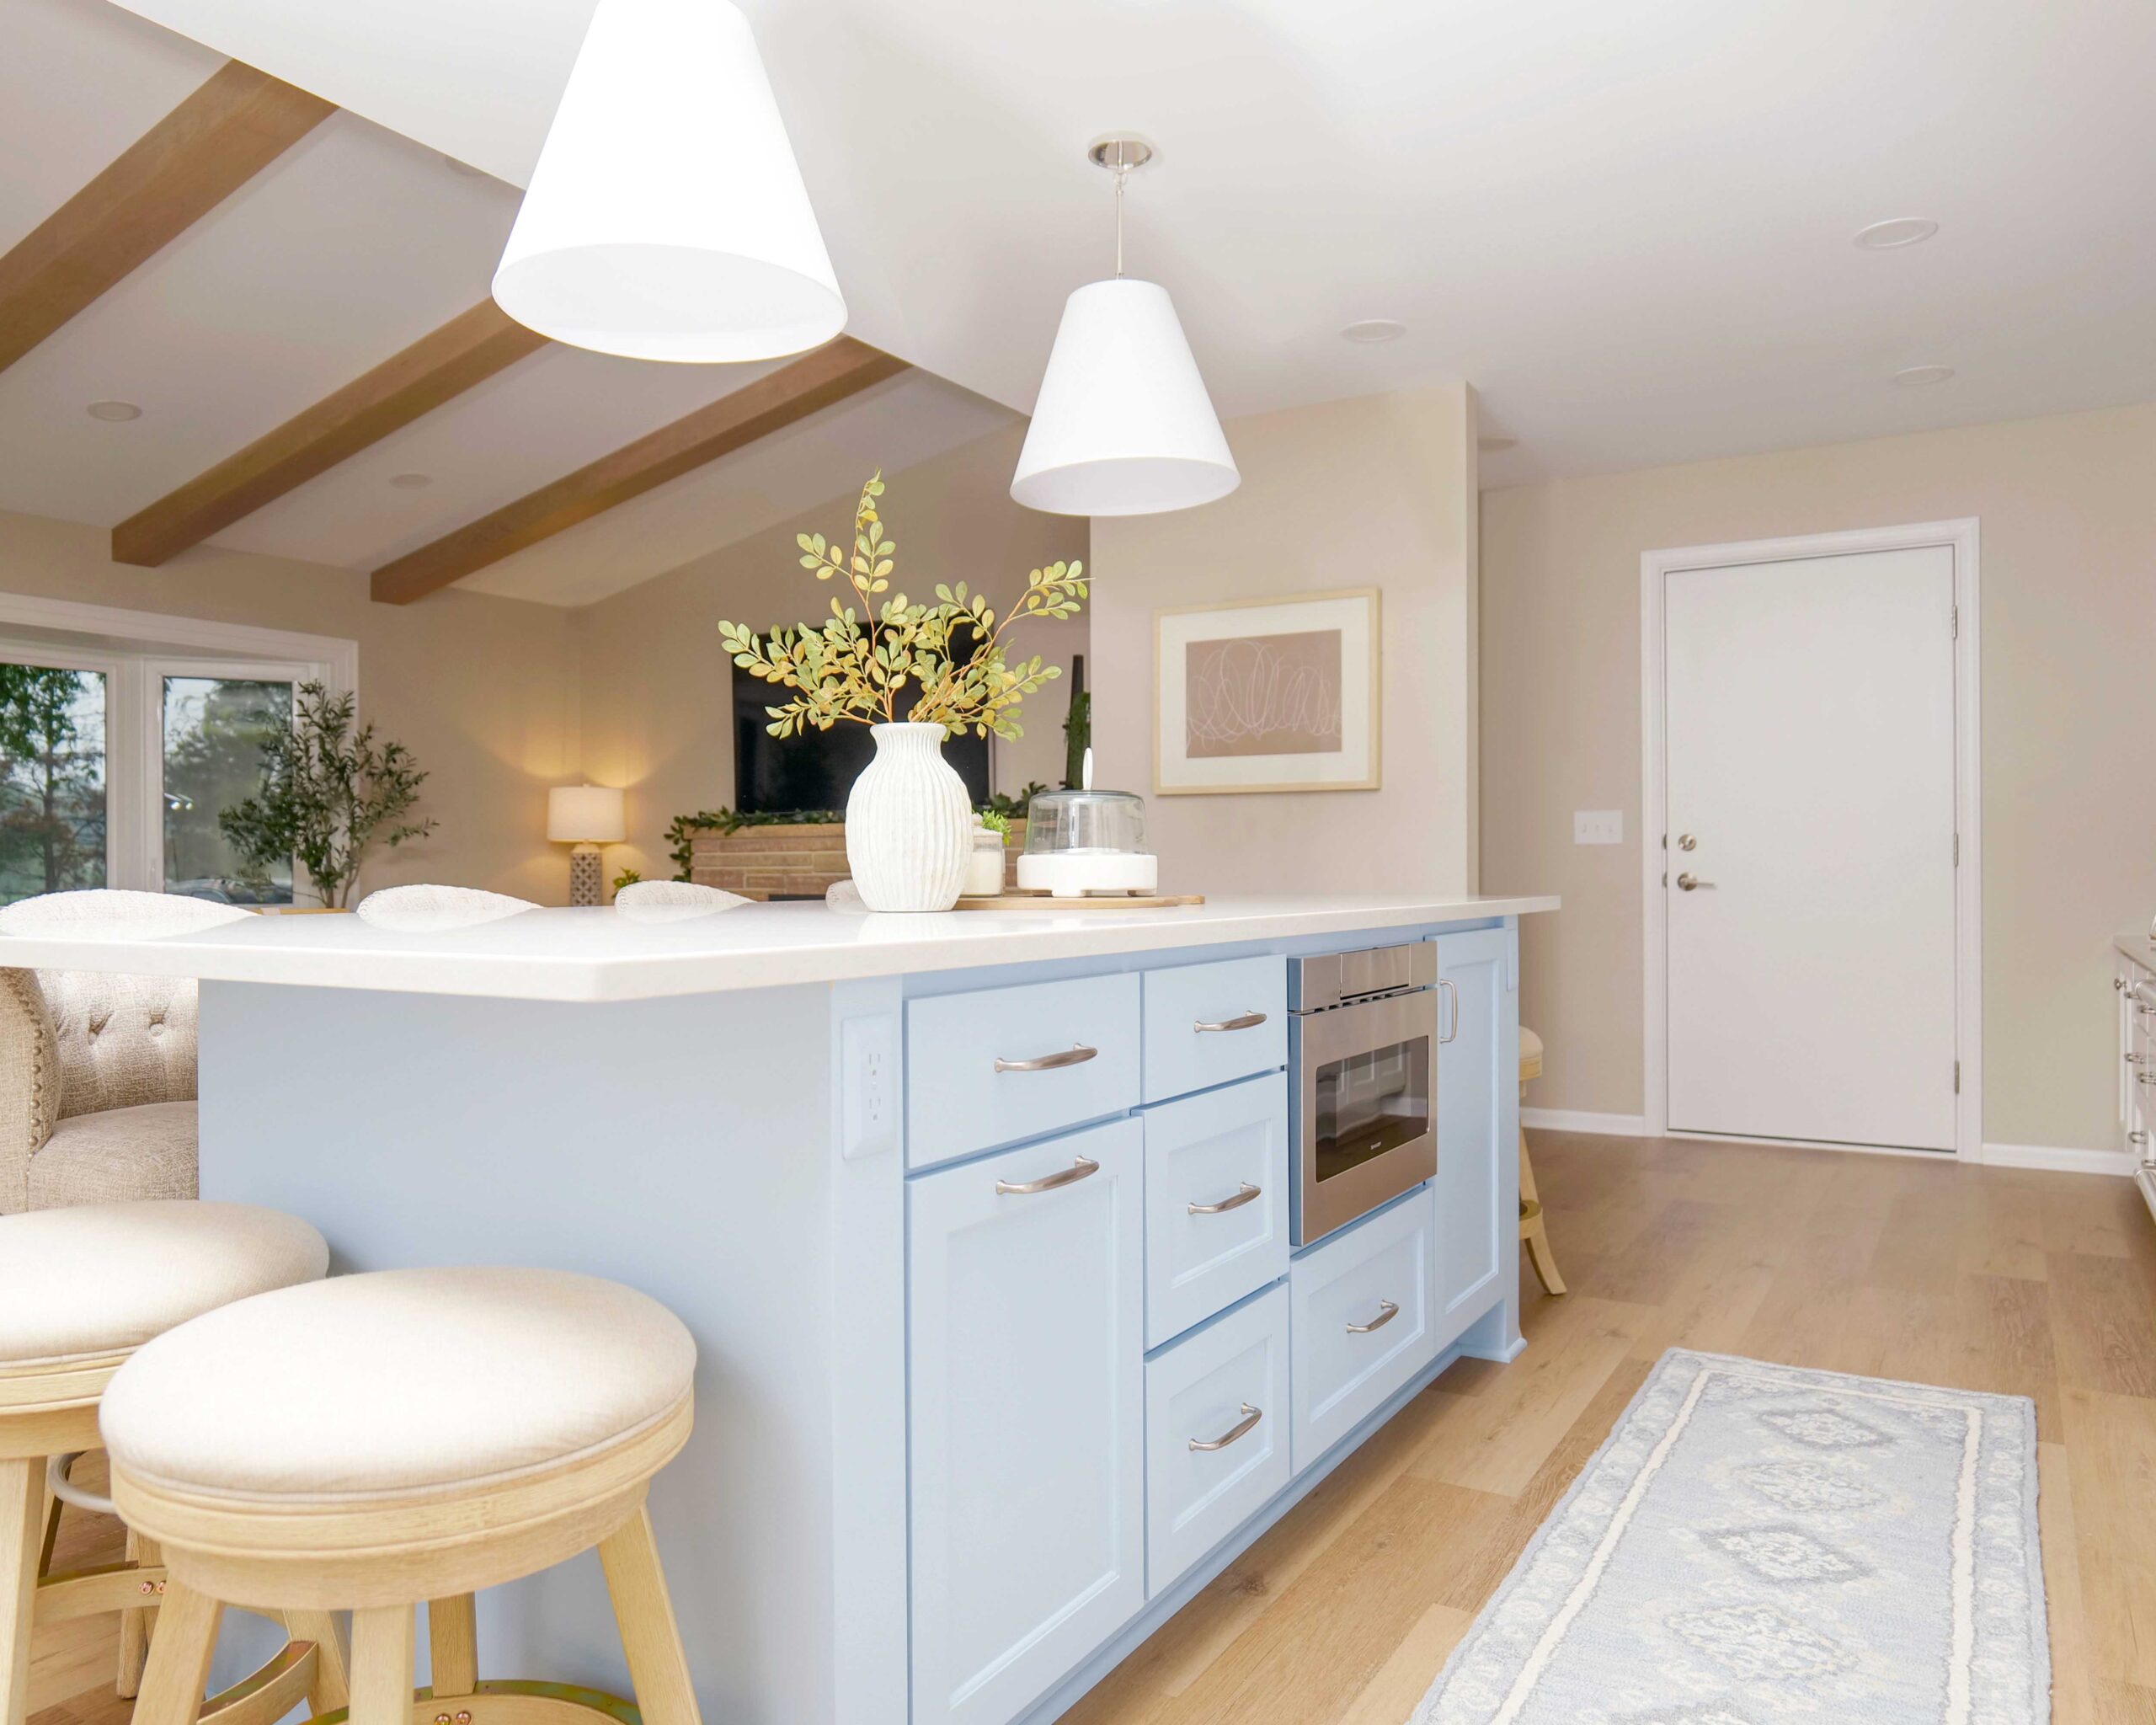 A coastal style kitchen remodel with a blue island and stools.